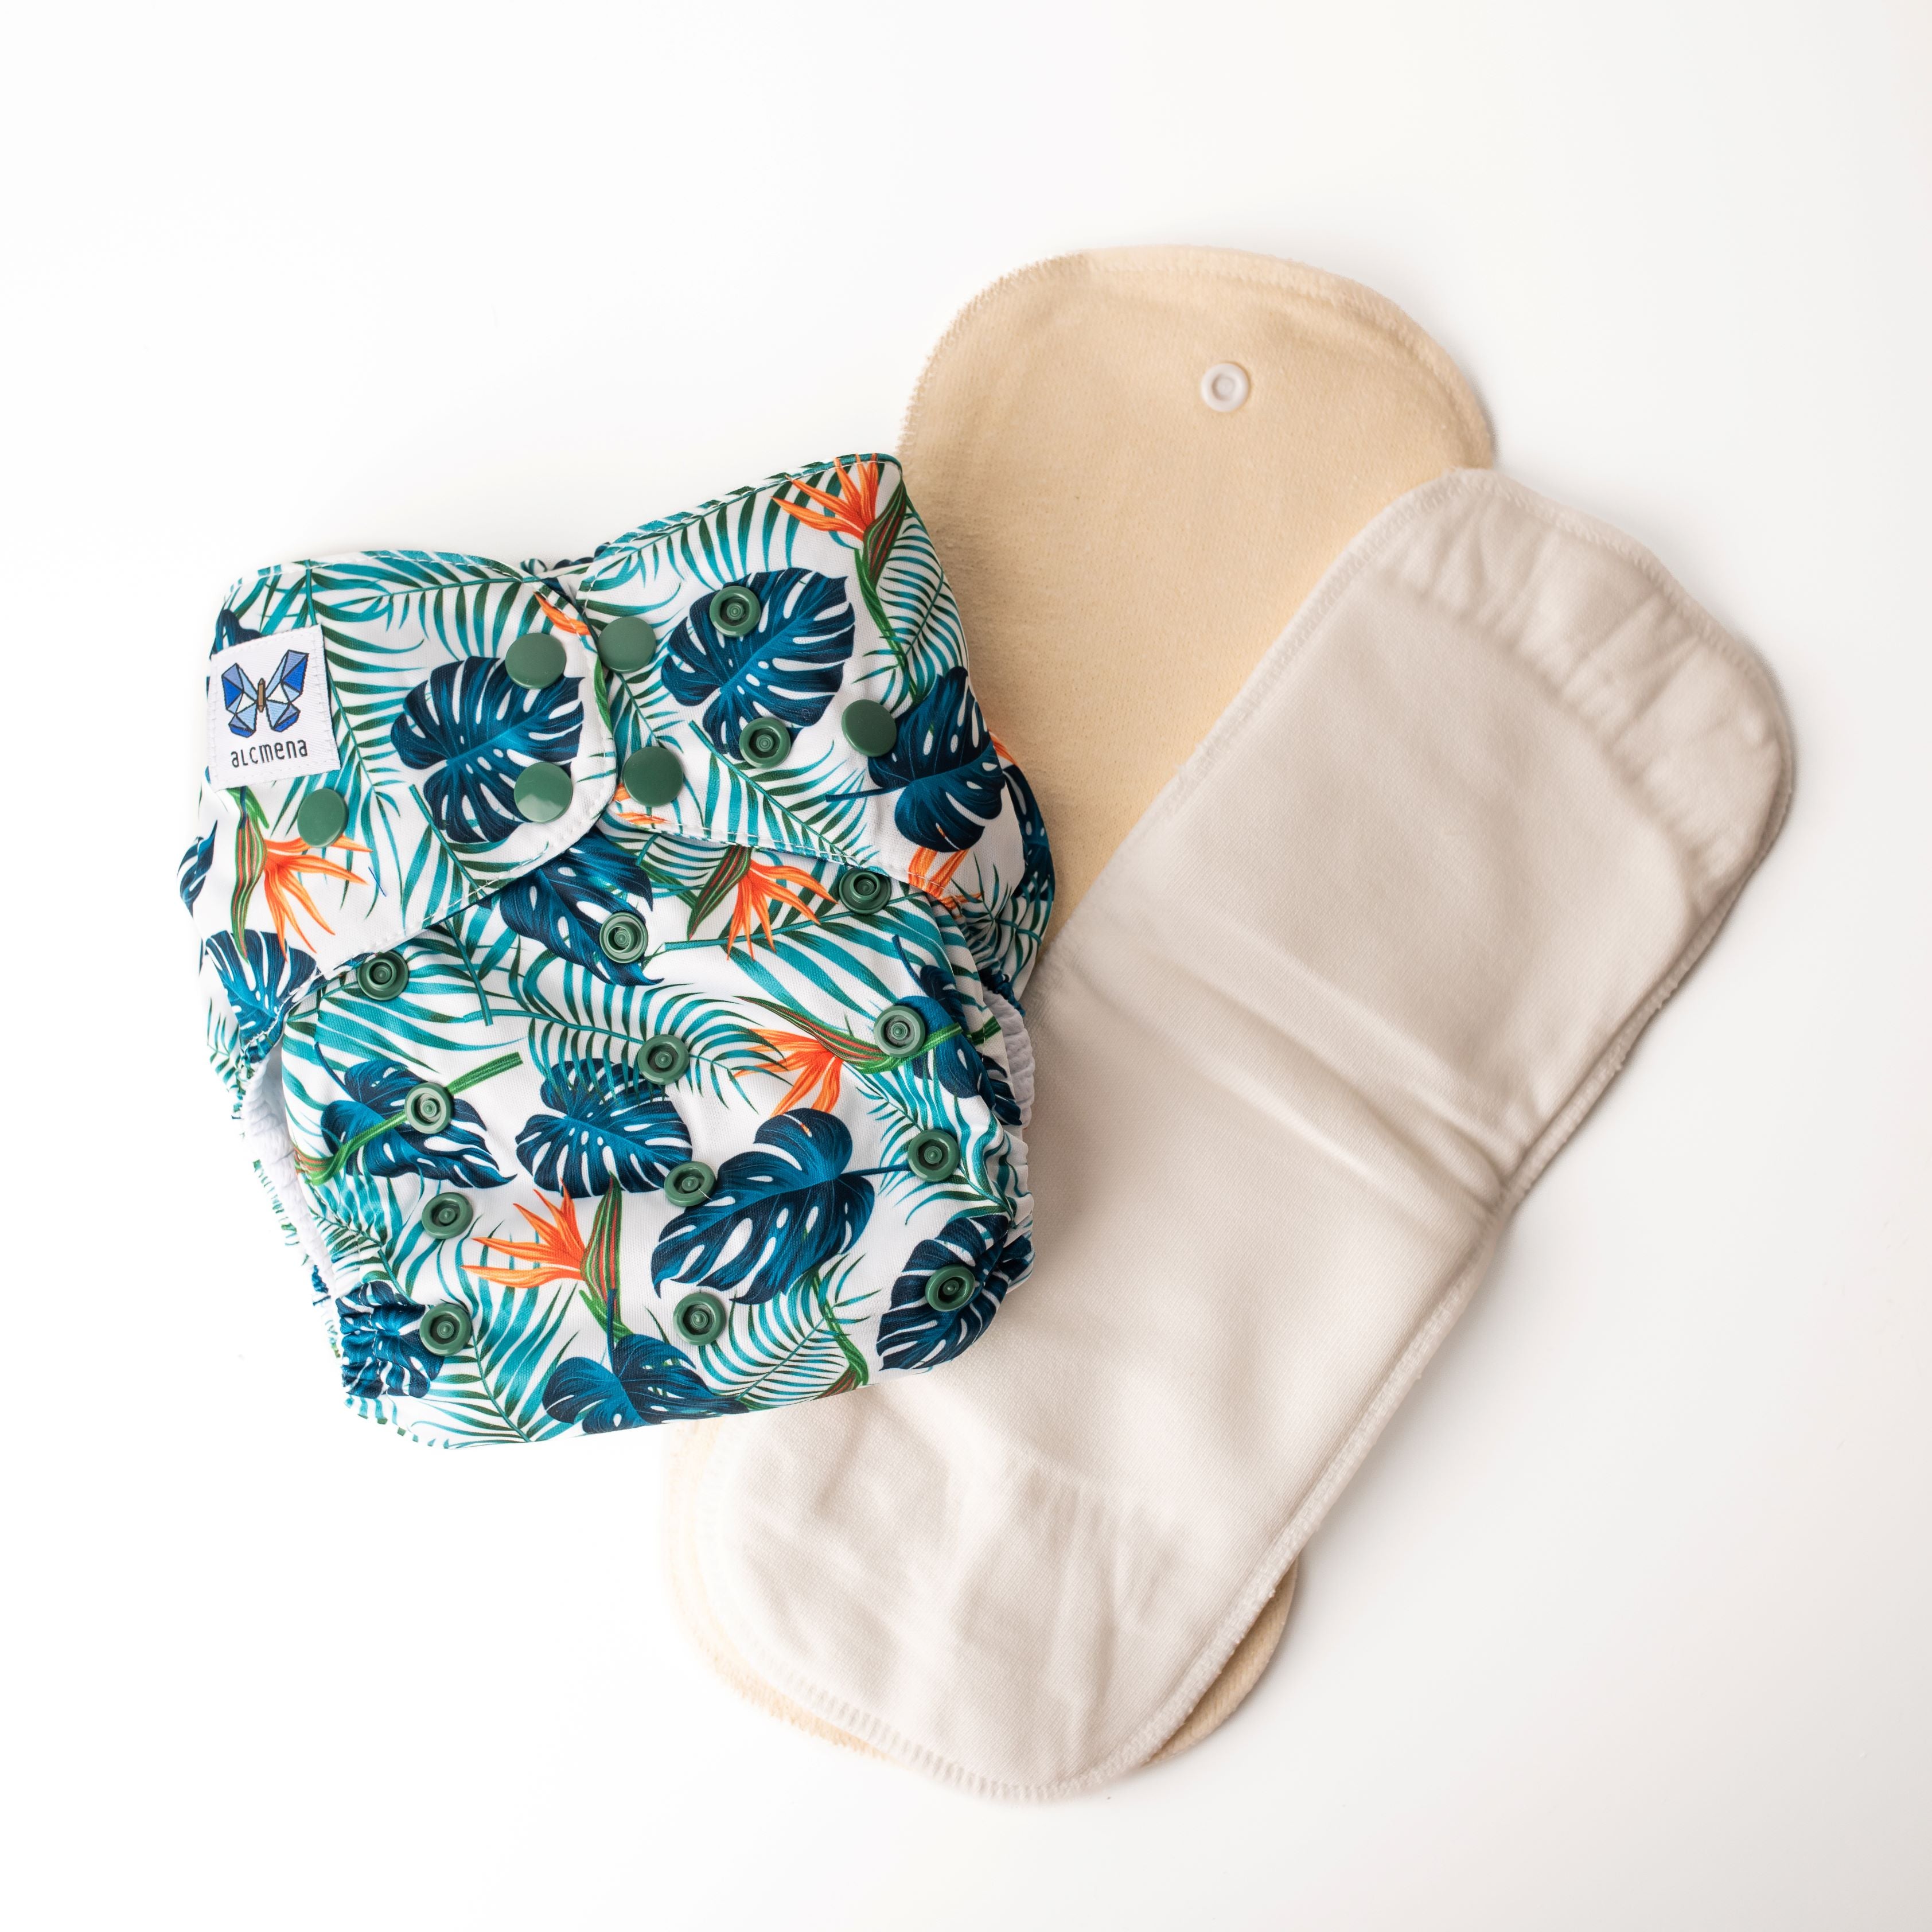 Classic Reusable Cloth Nappy V1.0 | Fern Down For What